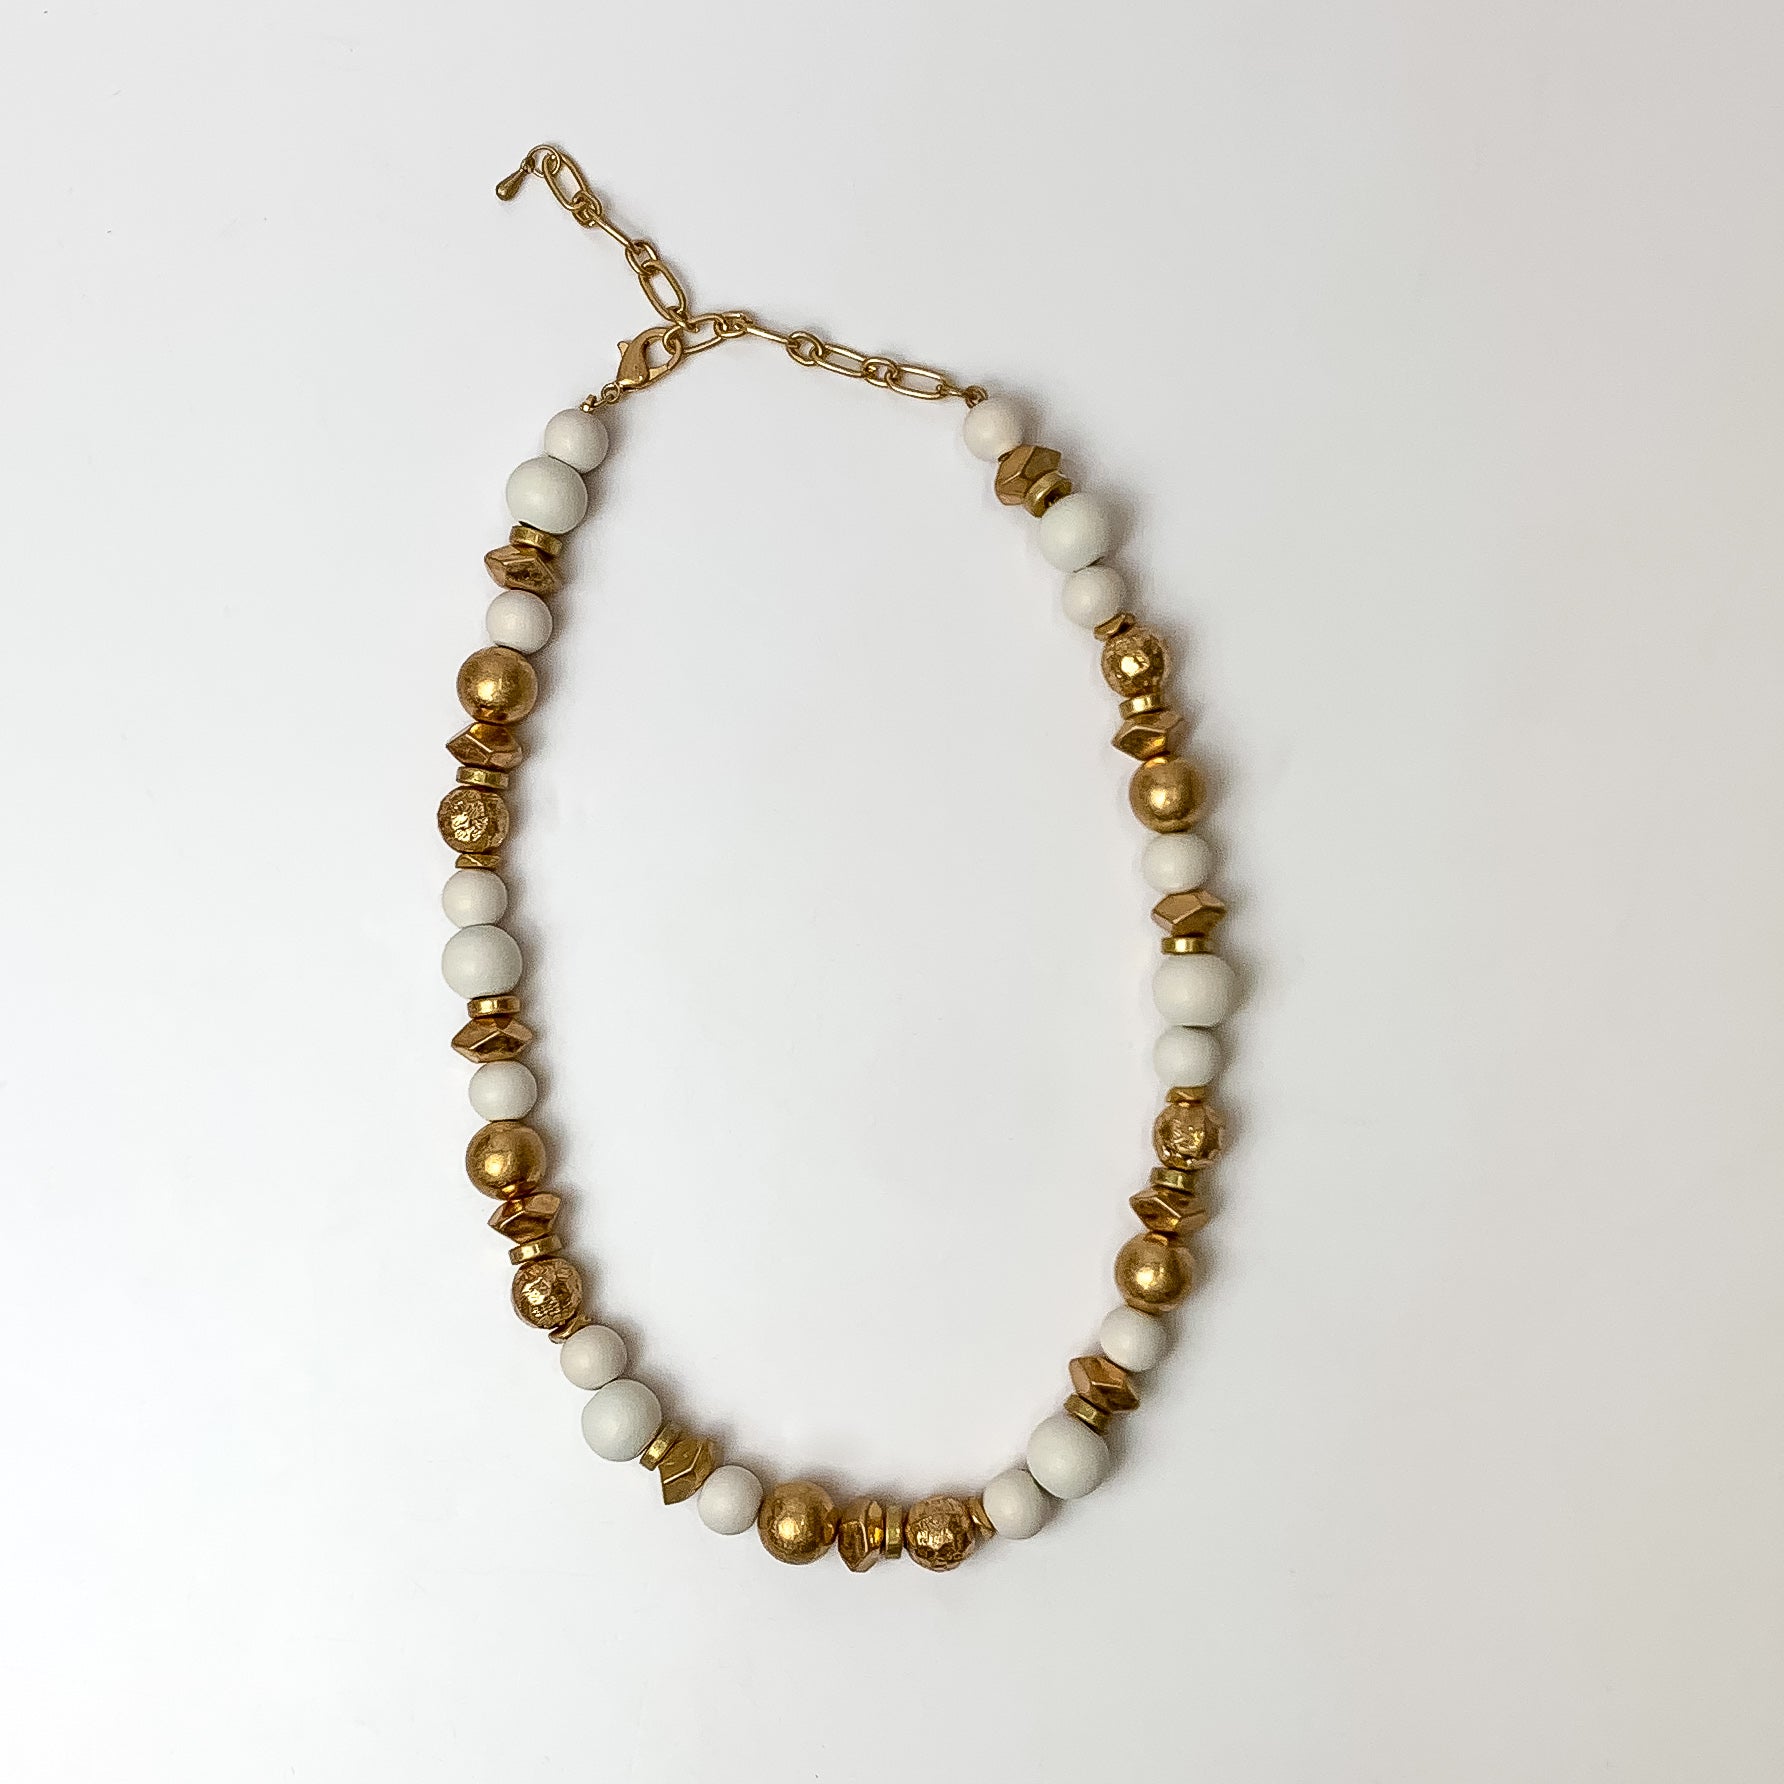 This texture beaded necklace with gold tone and white beads are placed on a white background.